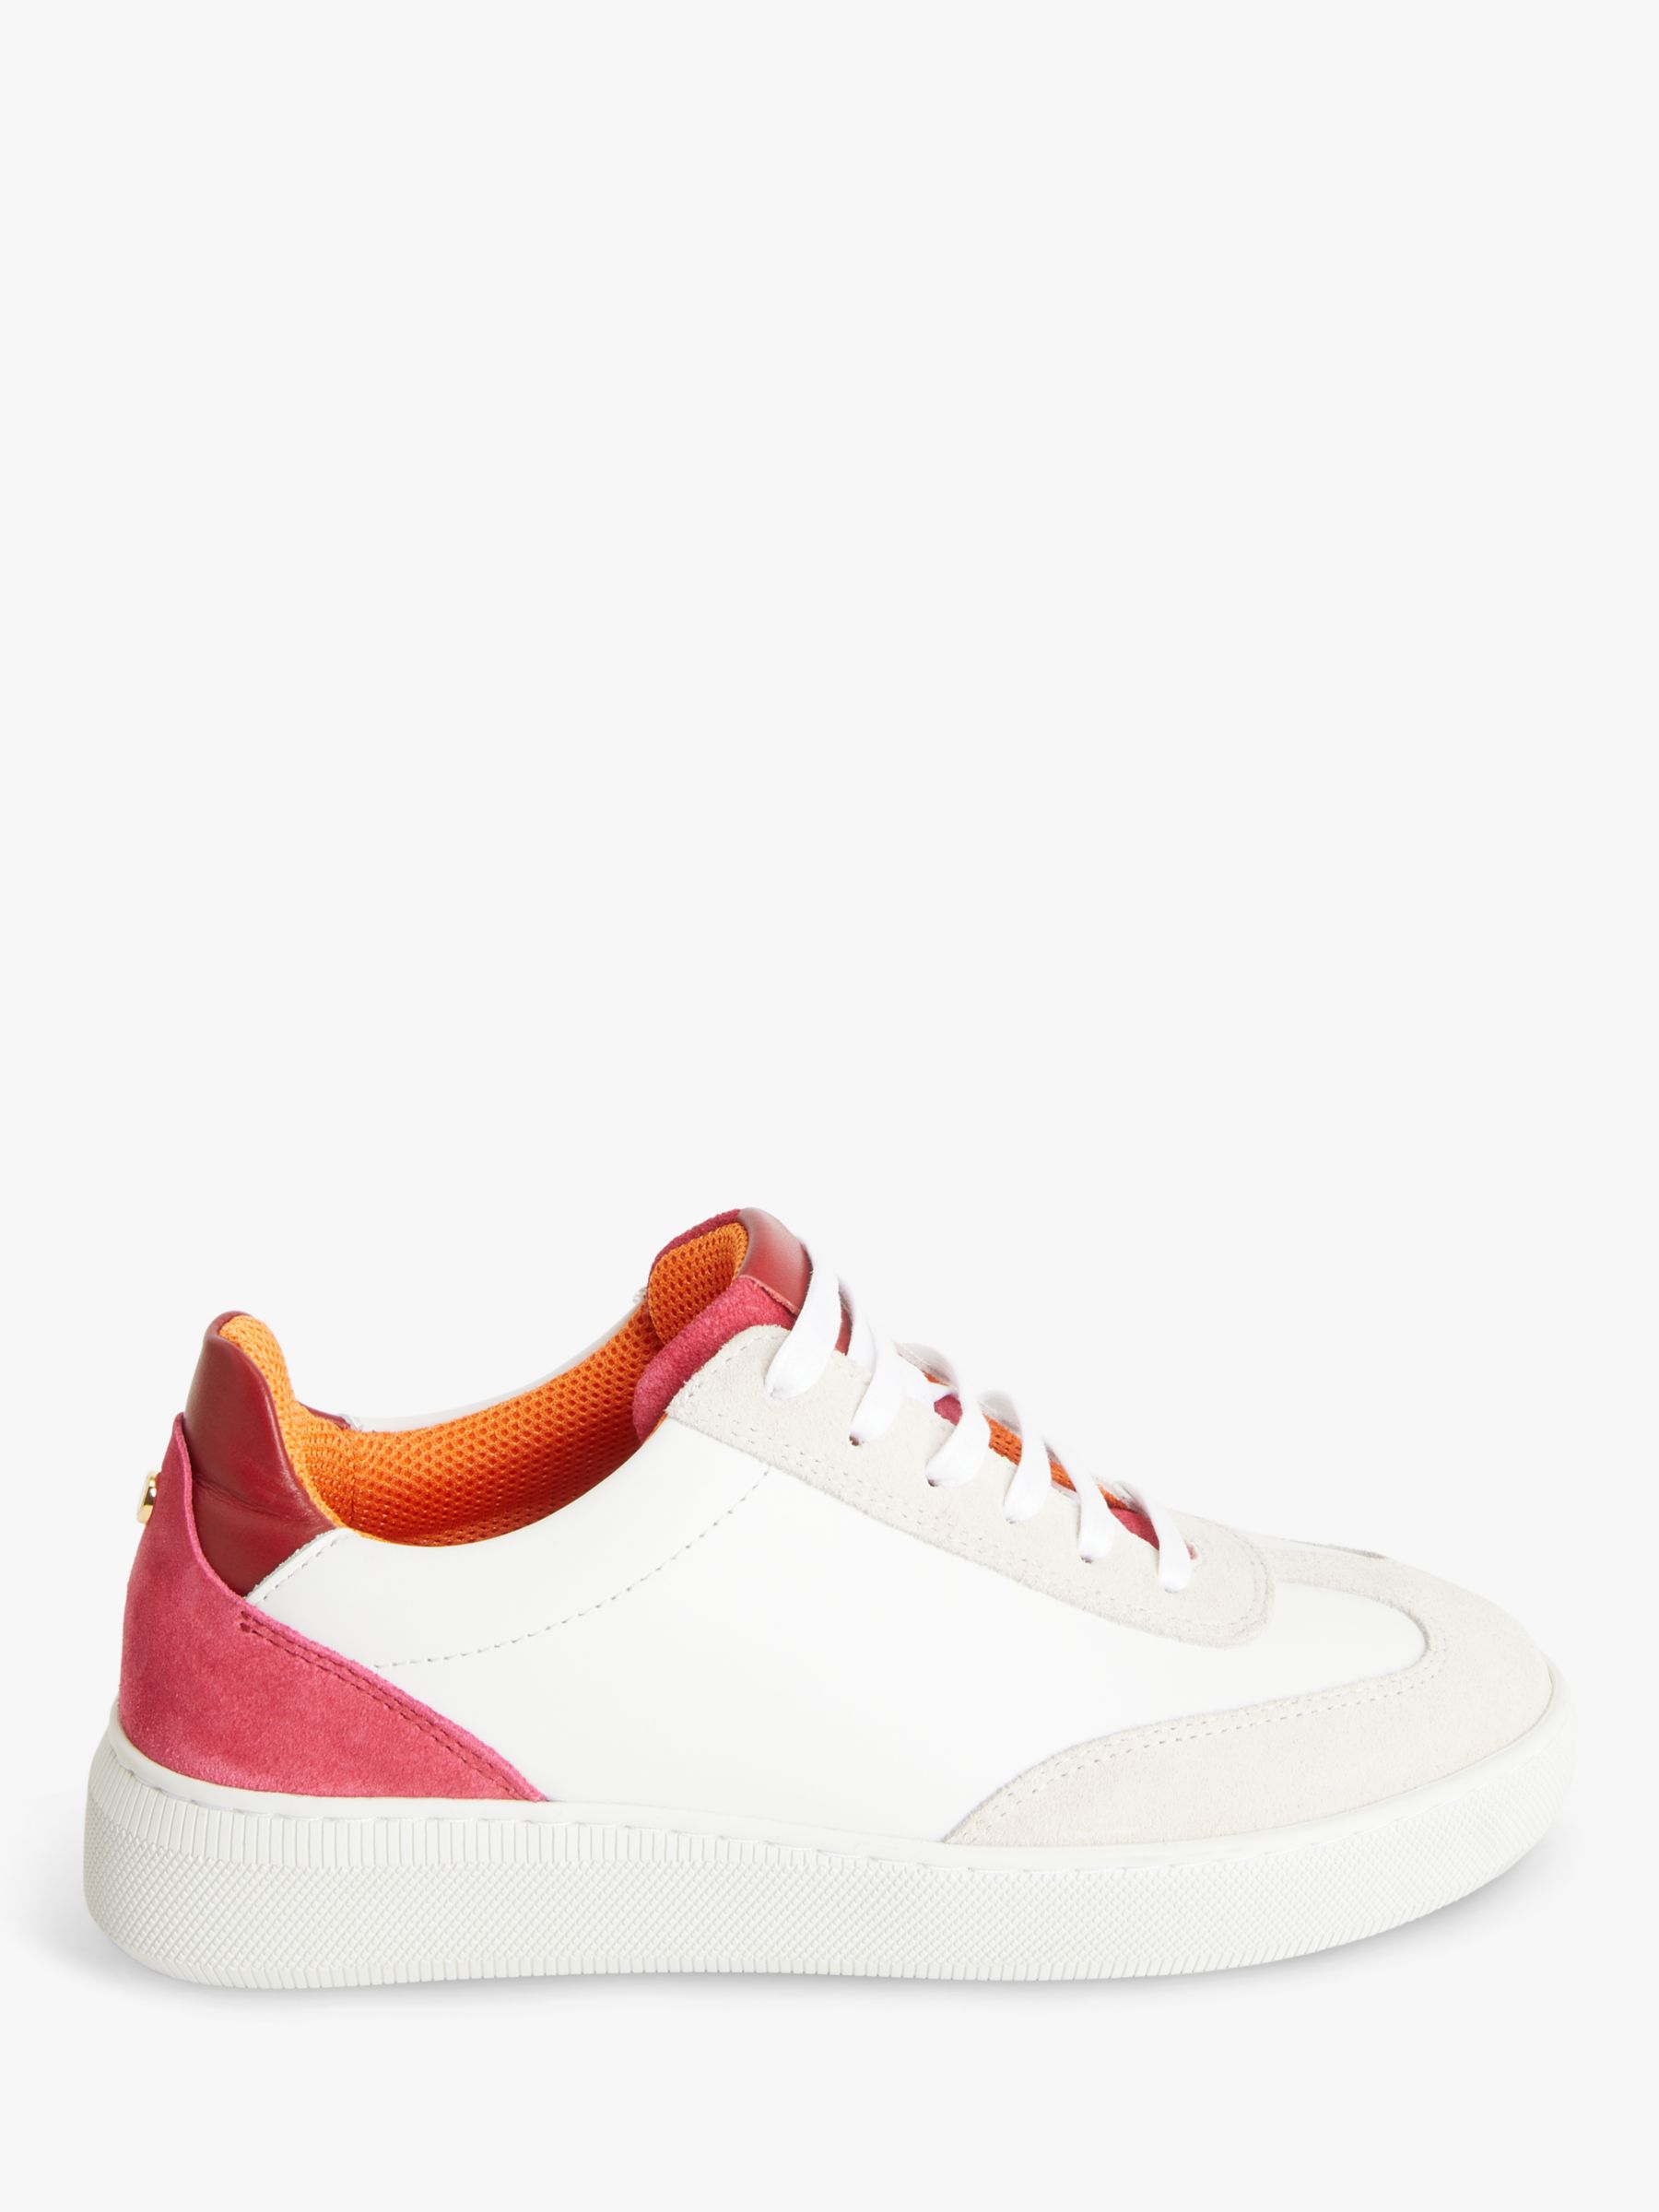 John Lewis Fern Leather Trainers, White/Pink